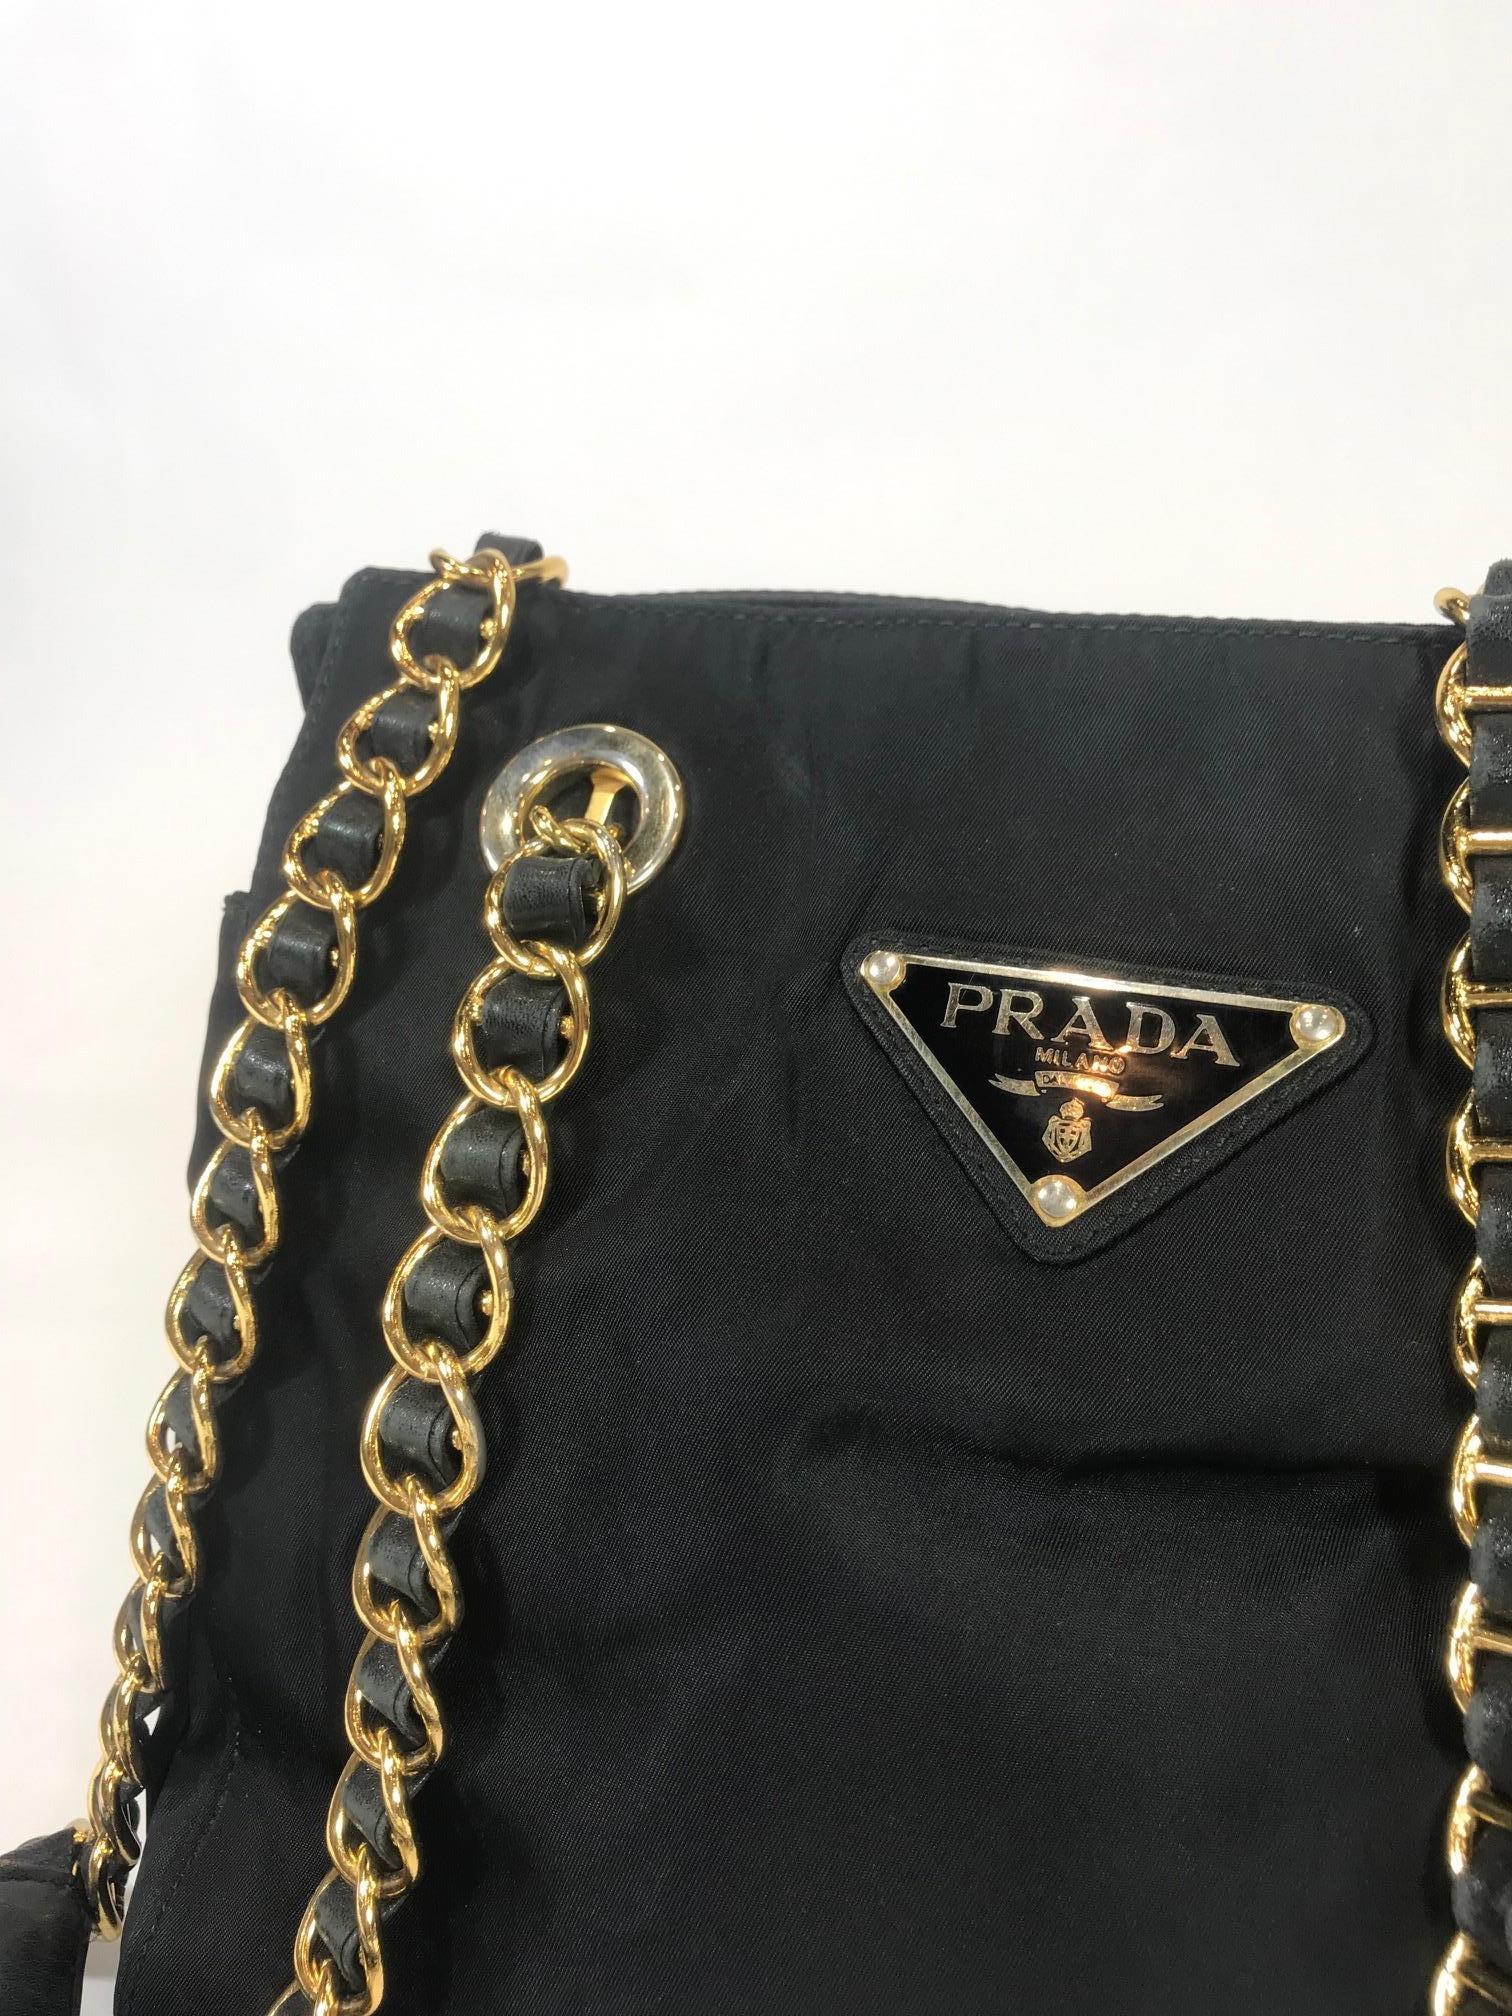 Black nylon. Gold-Tone hardware. Dual chain and leather shoulder straps. Prada logo at front. Three interior compartments. Middle compartment has top zippered closure. One interior zippered pocket.